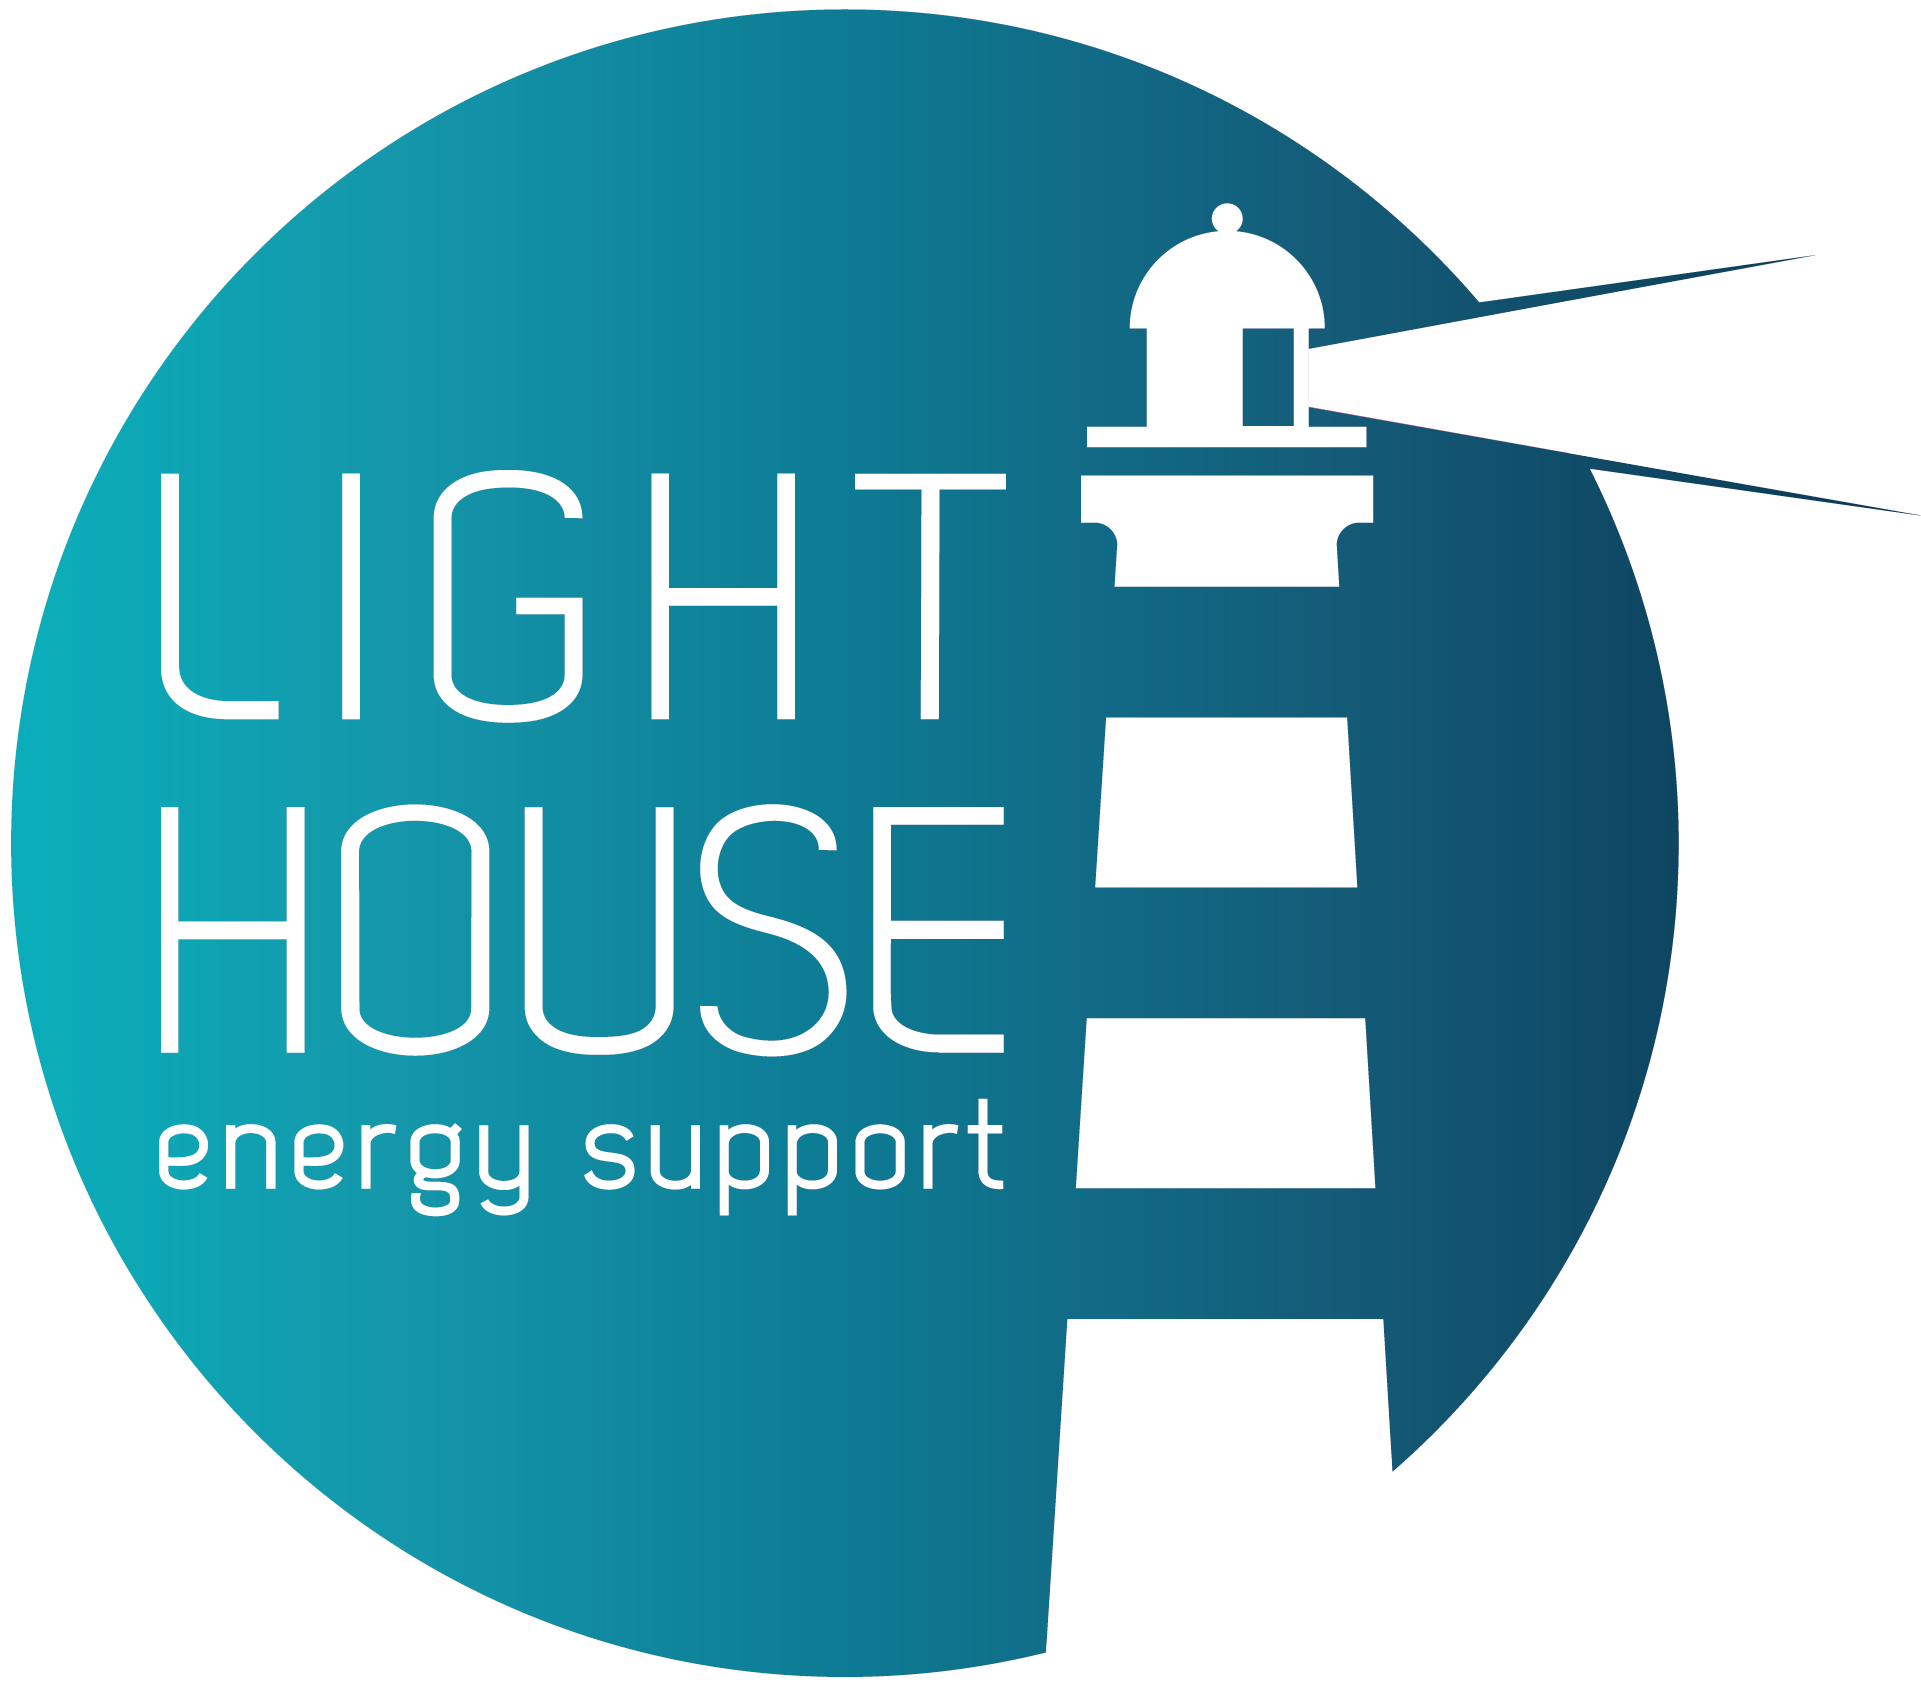 Lighthouse Energy Support